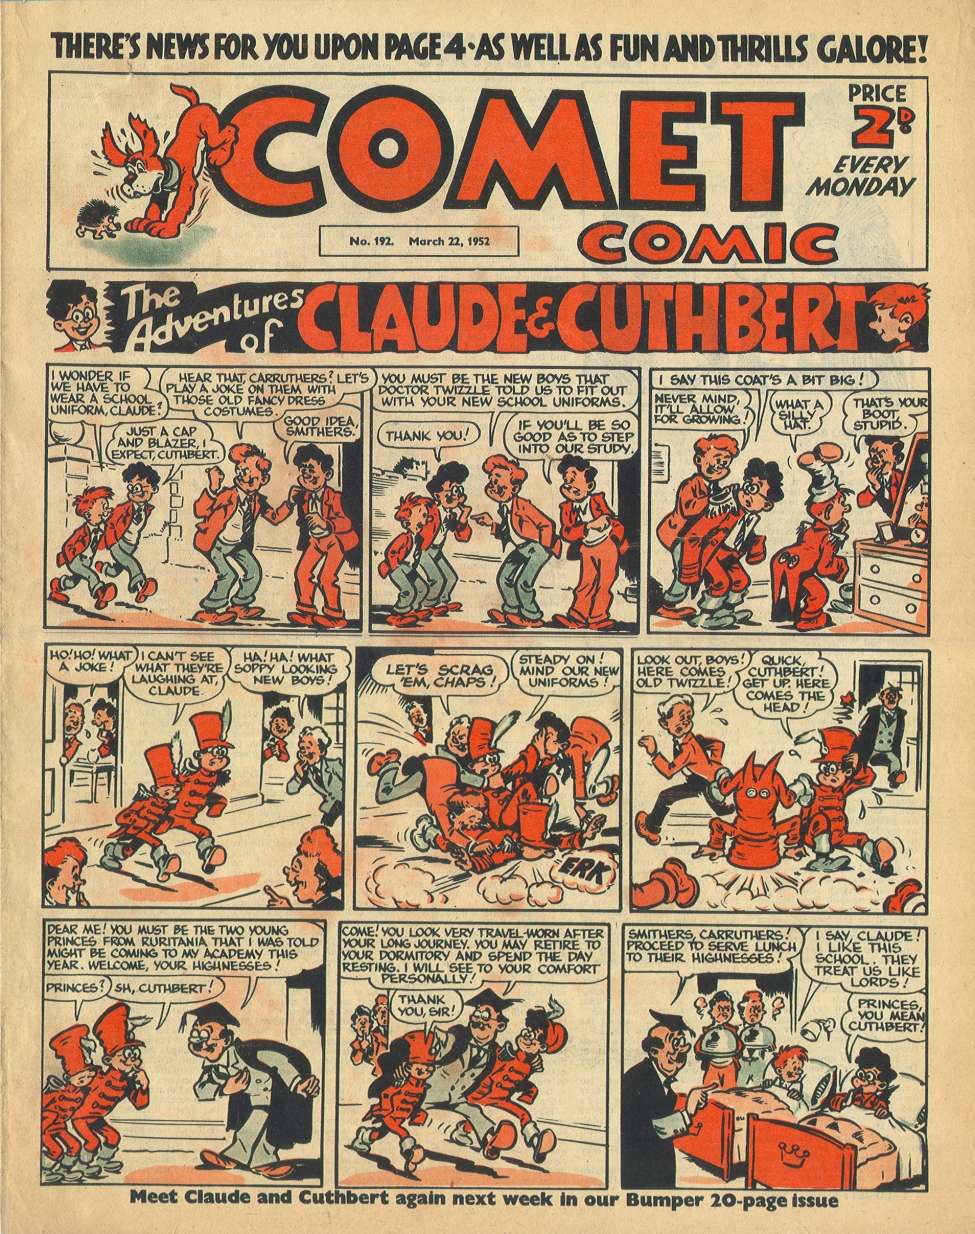 Book Cover For The Comet 192